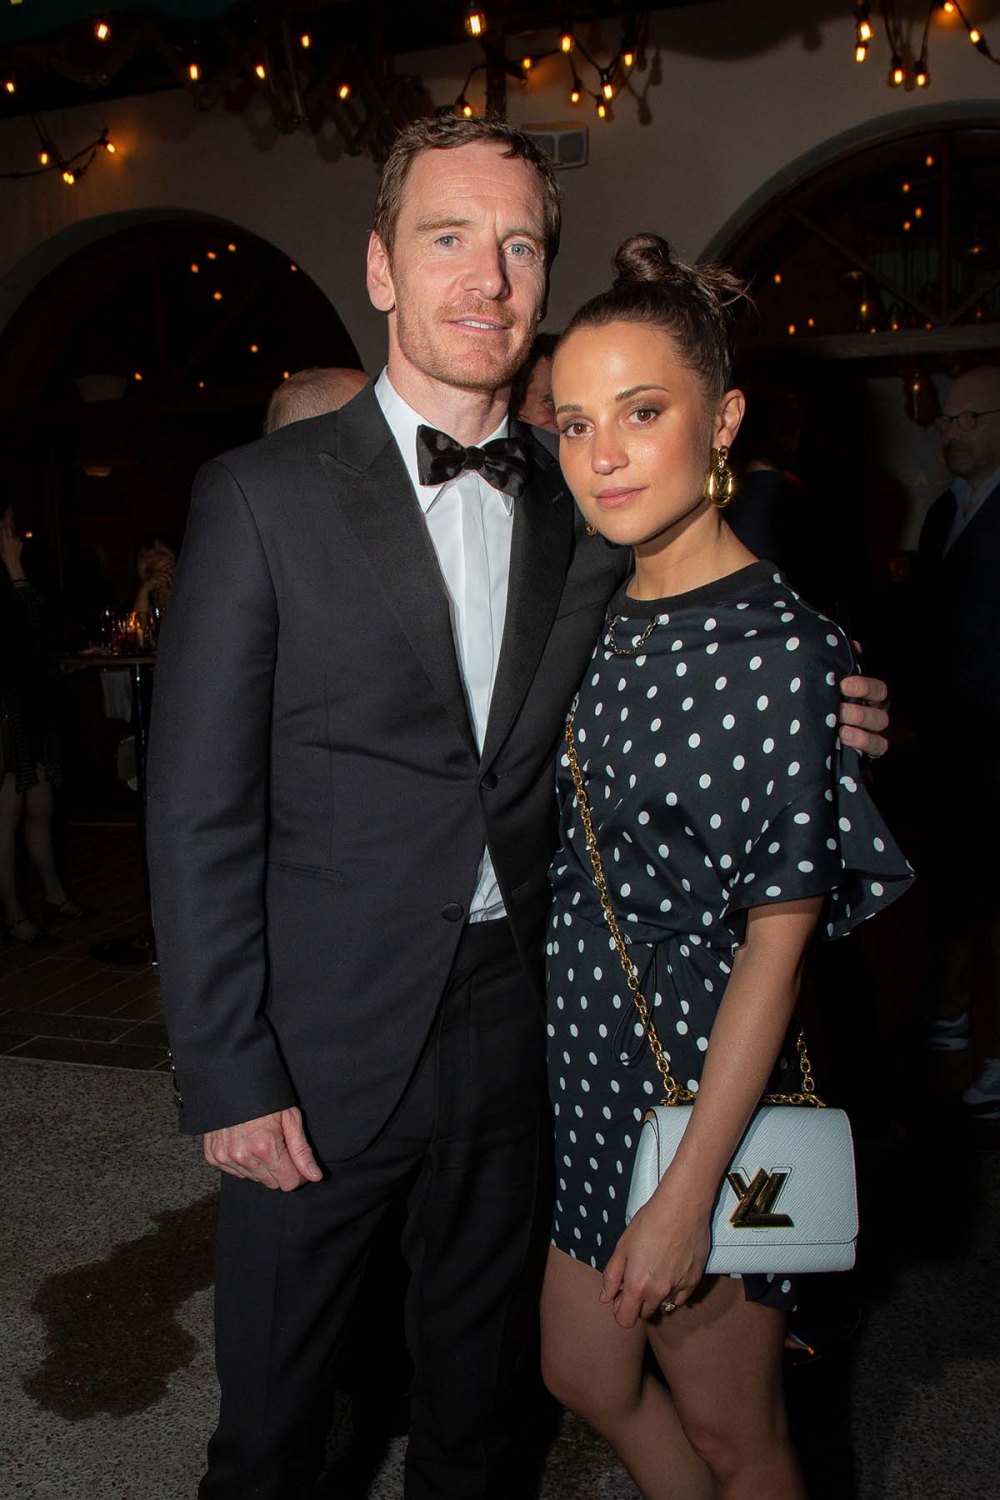 Michael Fassbender reveals the moment he fell in love with Alicia